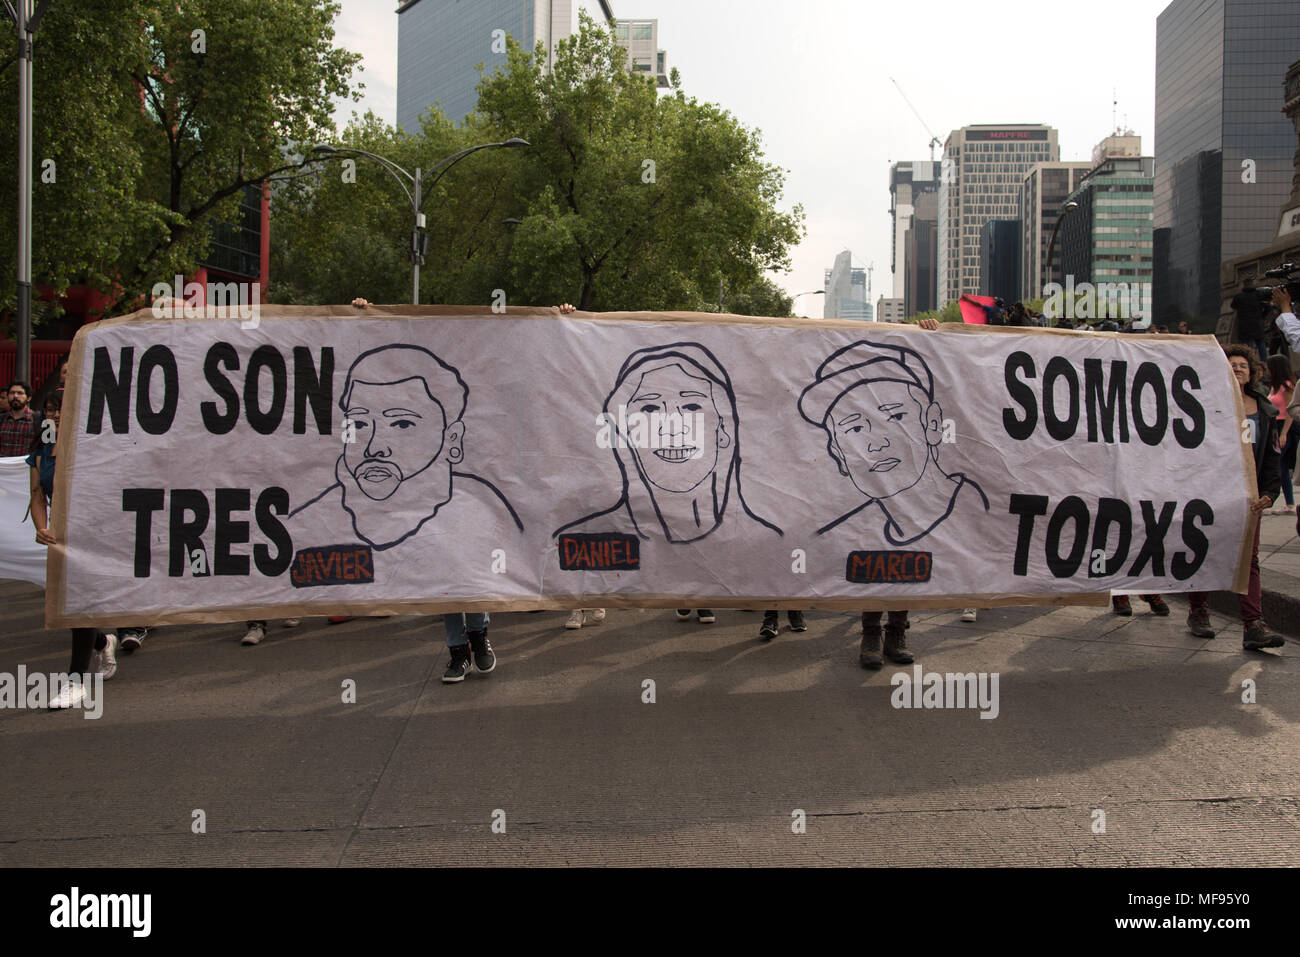 Mexico City, Mexico. 24th April, 2018.  Hundreds of students rallied in Mexico City to ask for justice in the case of the killing of three film students in Guadalajara, Mexico. The banner reads 'No son tres, somos todxs' ('It is not three , it is everyone'). Credit: Miguel A. Aguilar-Mancera/Alamy Live News Stock Photo